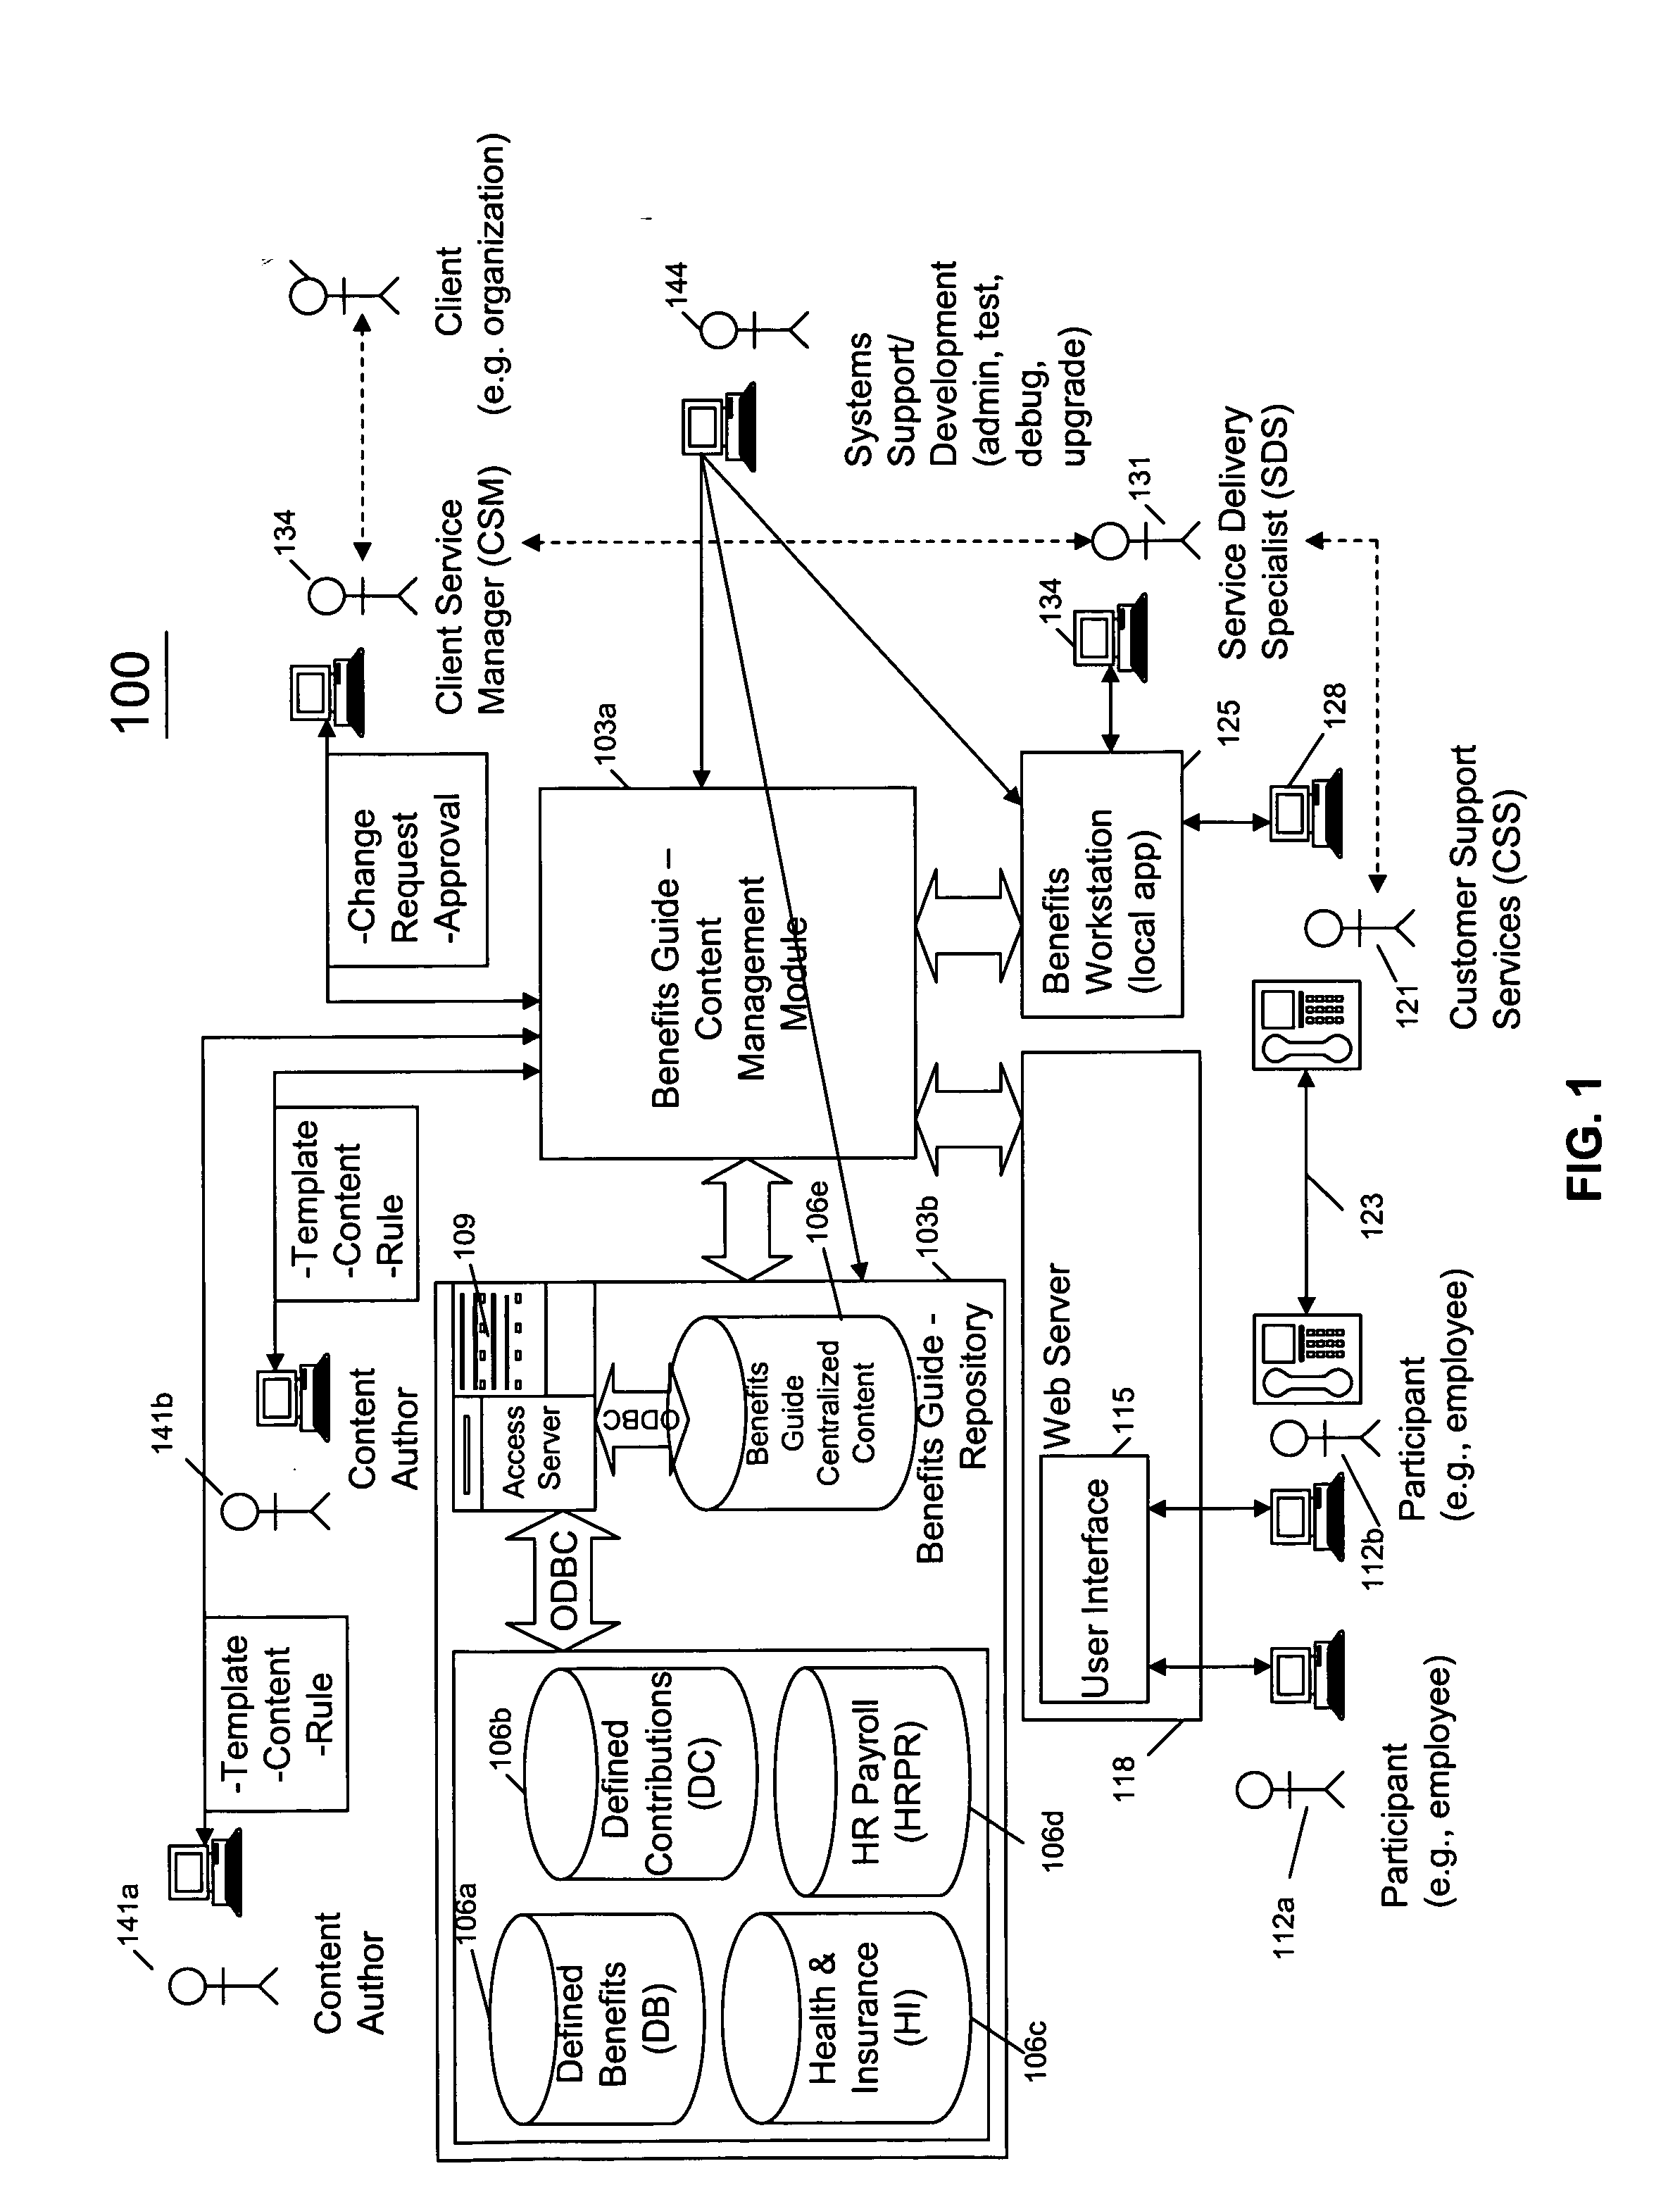 Multi-authoring within benefits content system